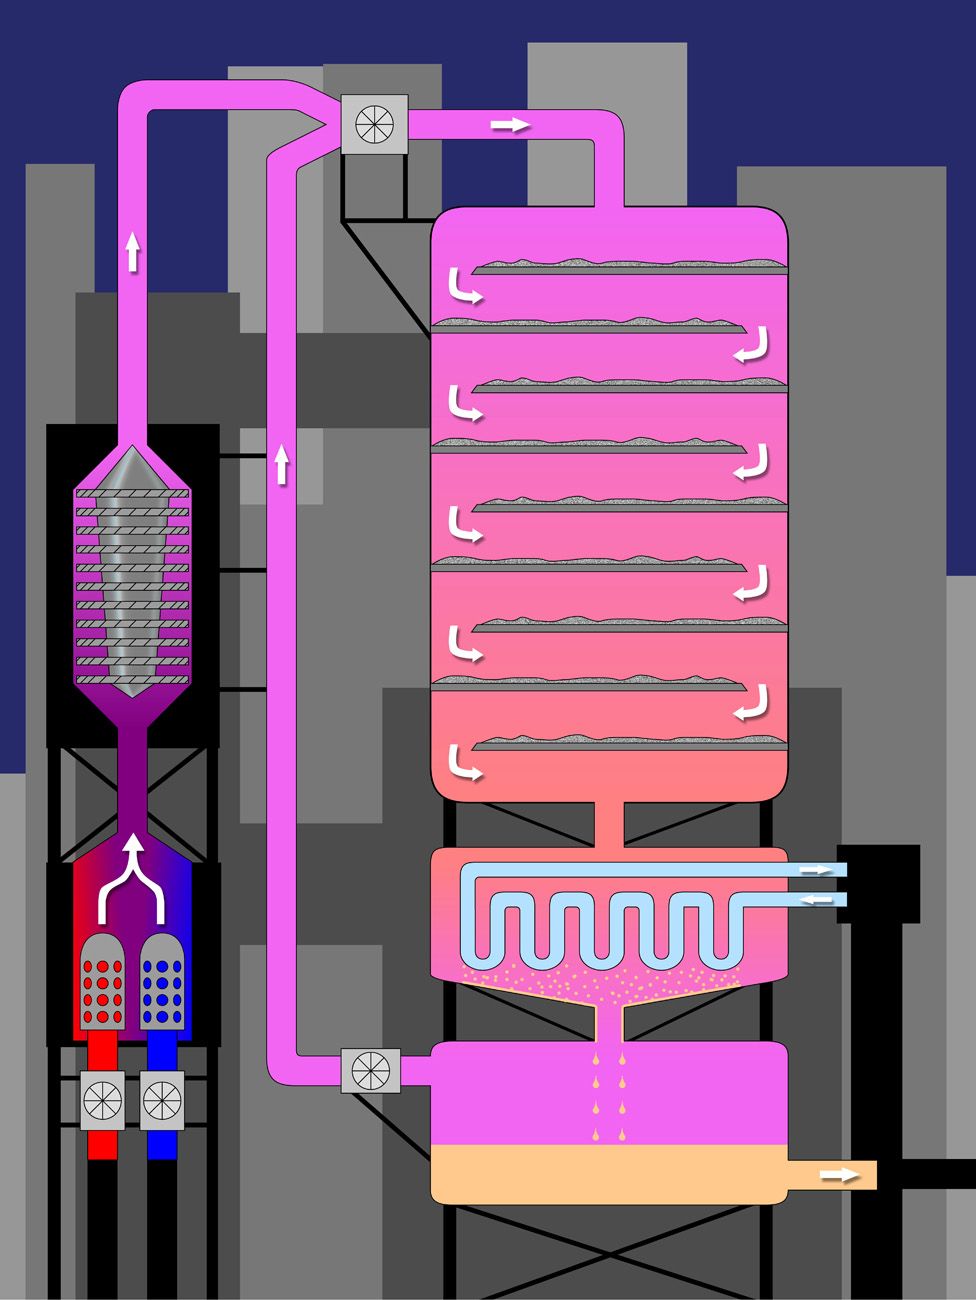 Schematic diagram of the Haber-Bosch Process to make ammonia from nitrogen and hydrogen gas